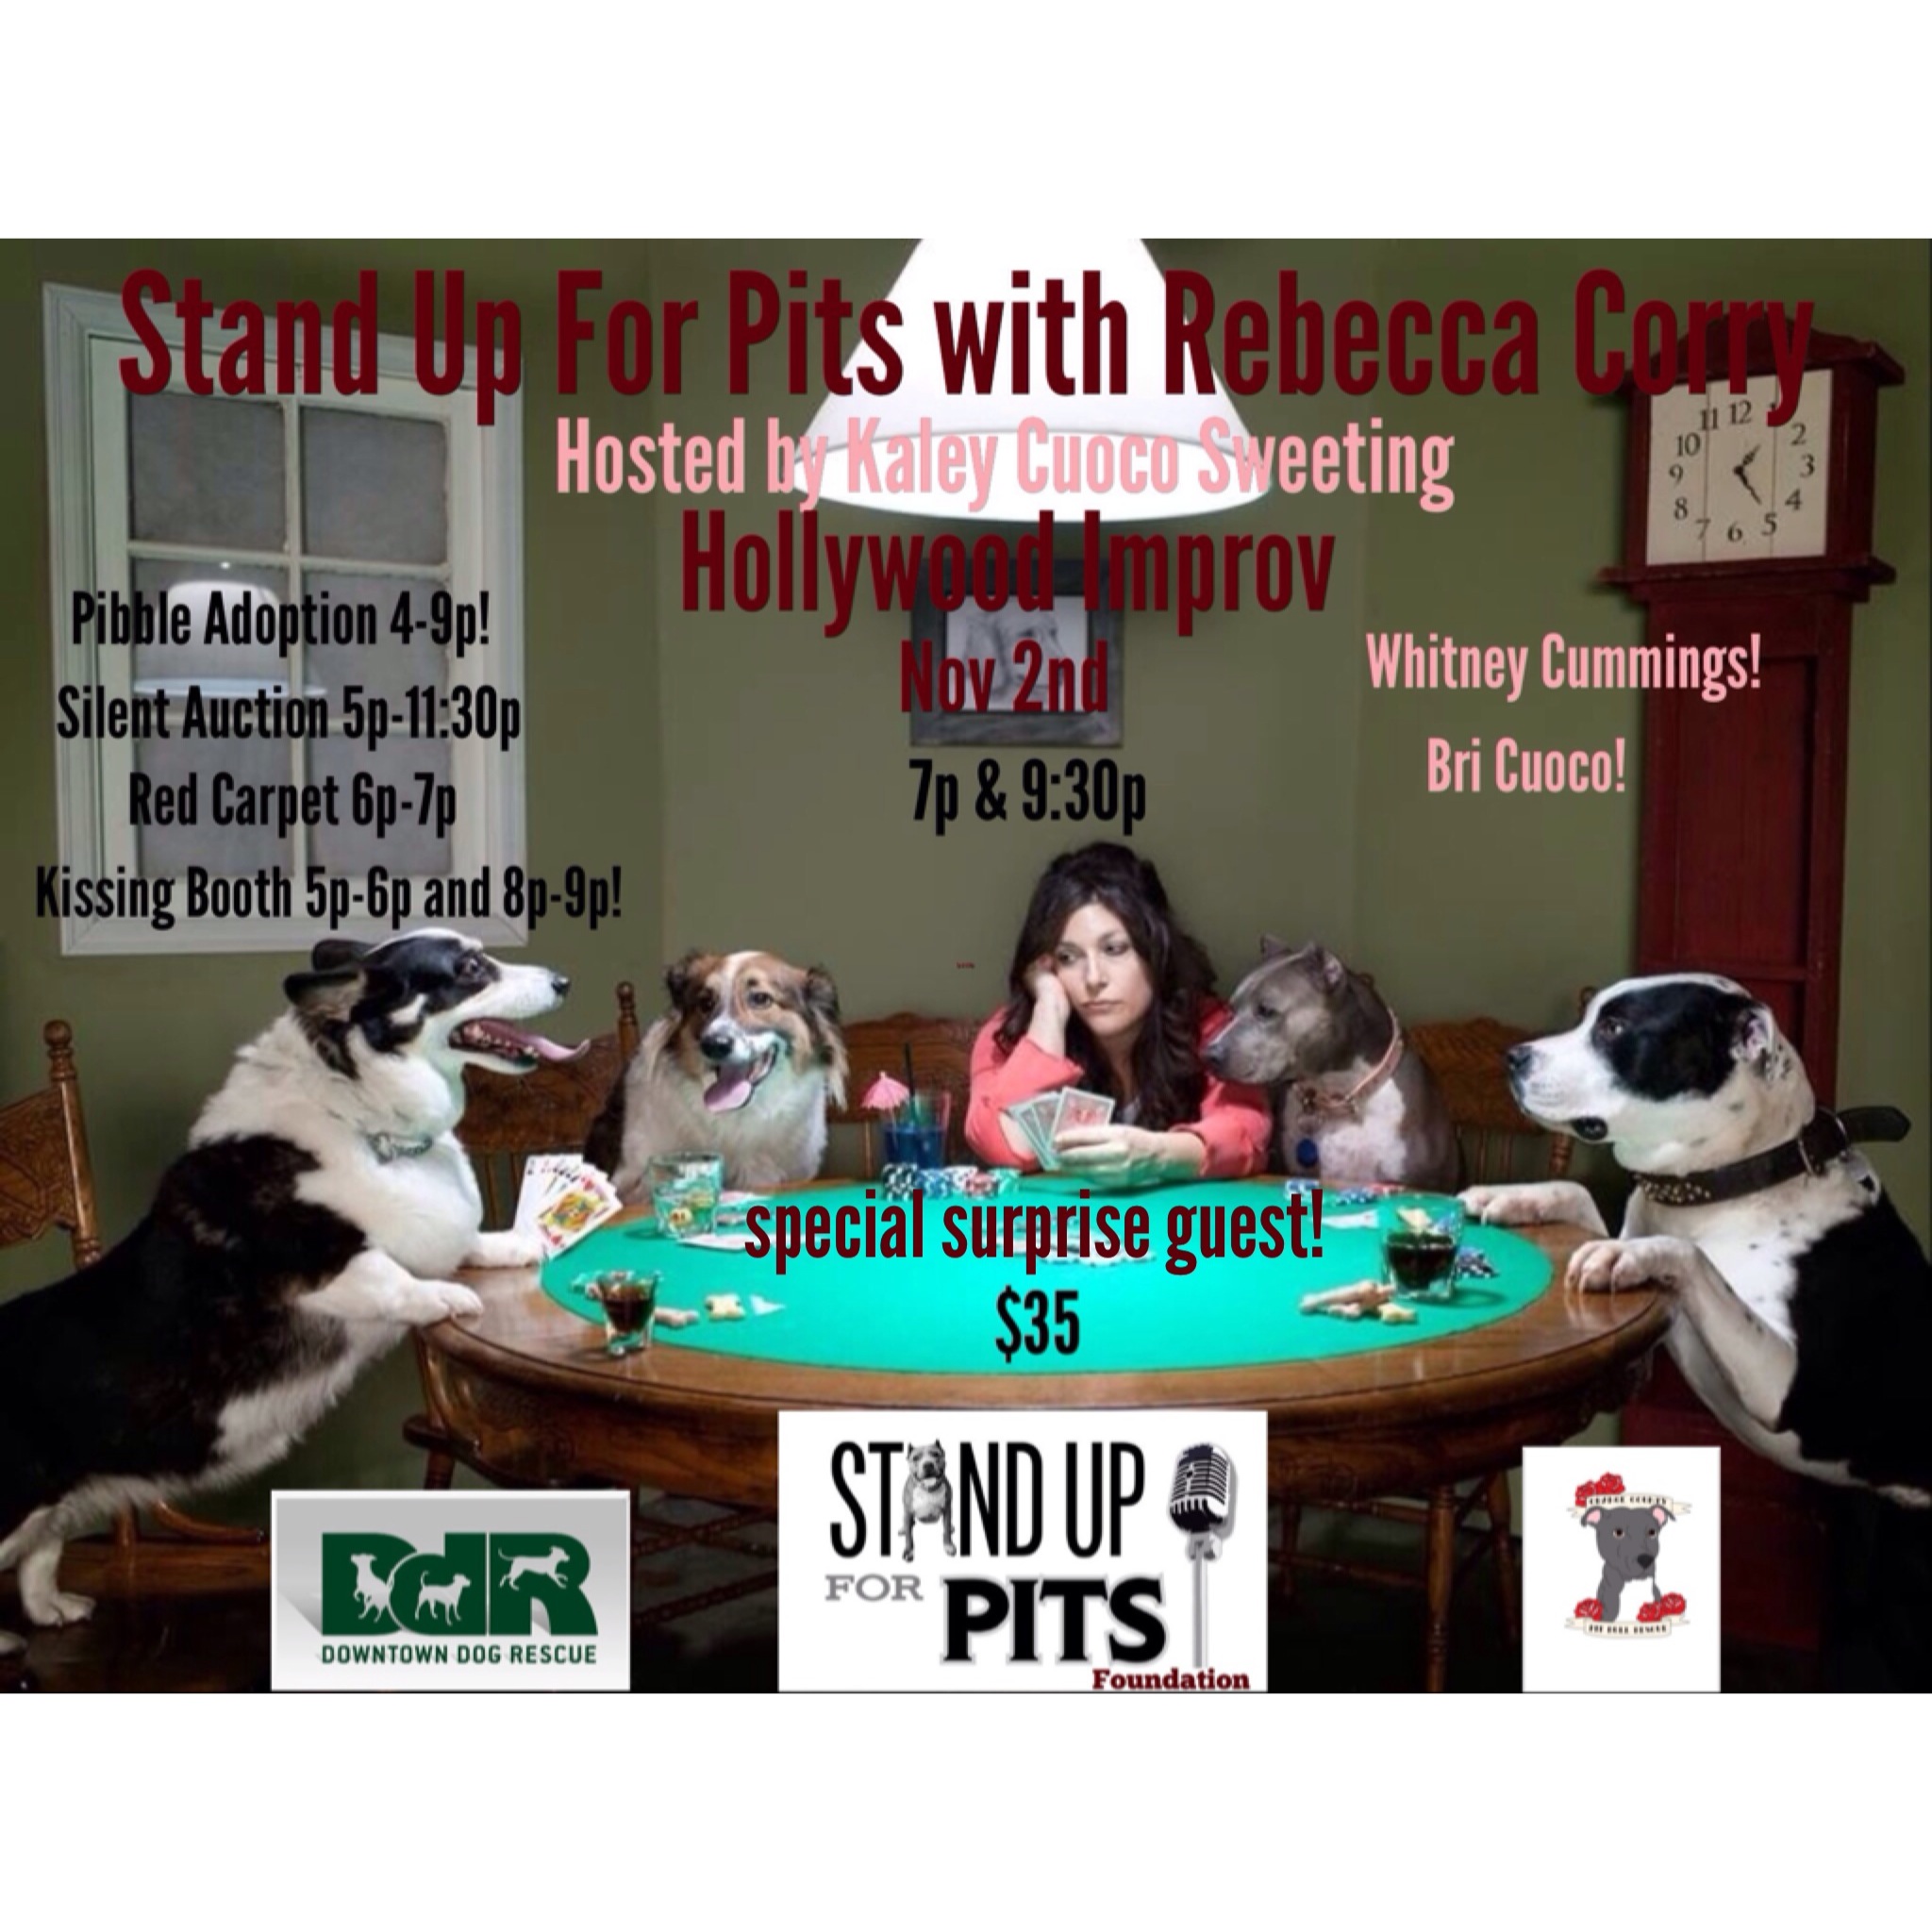 9:30PM Stand Up For Pits show ADDED Nov 2nd in Hollywood!!!